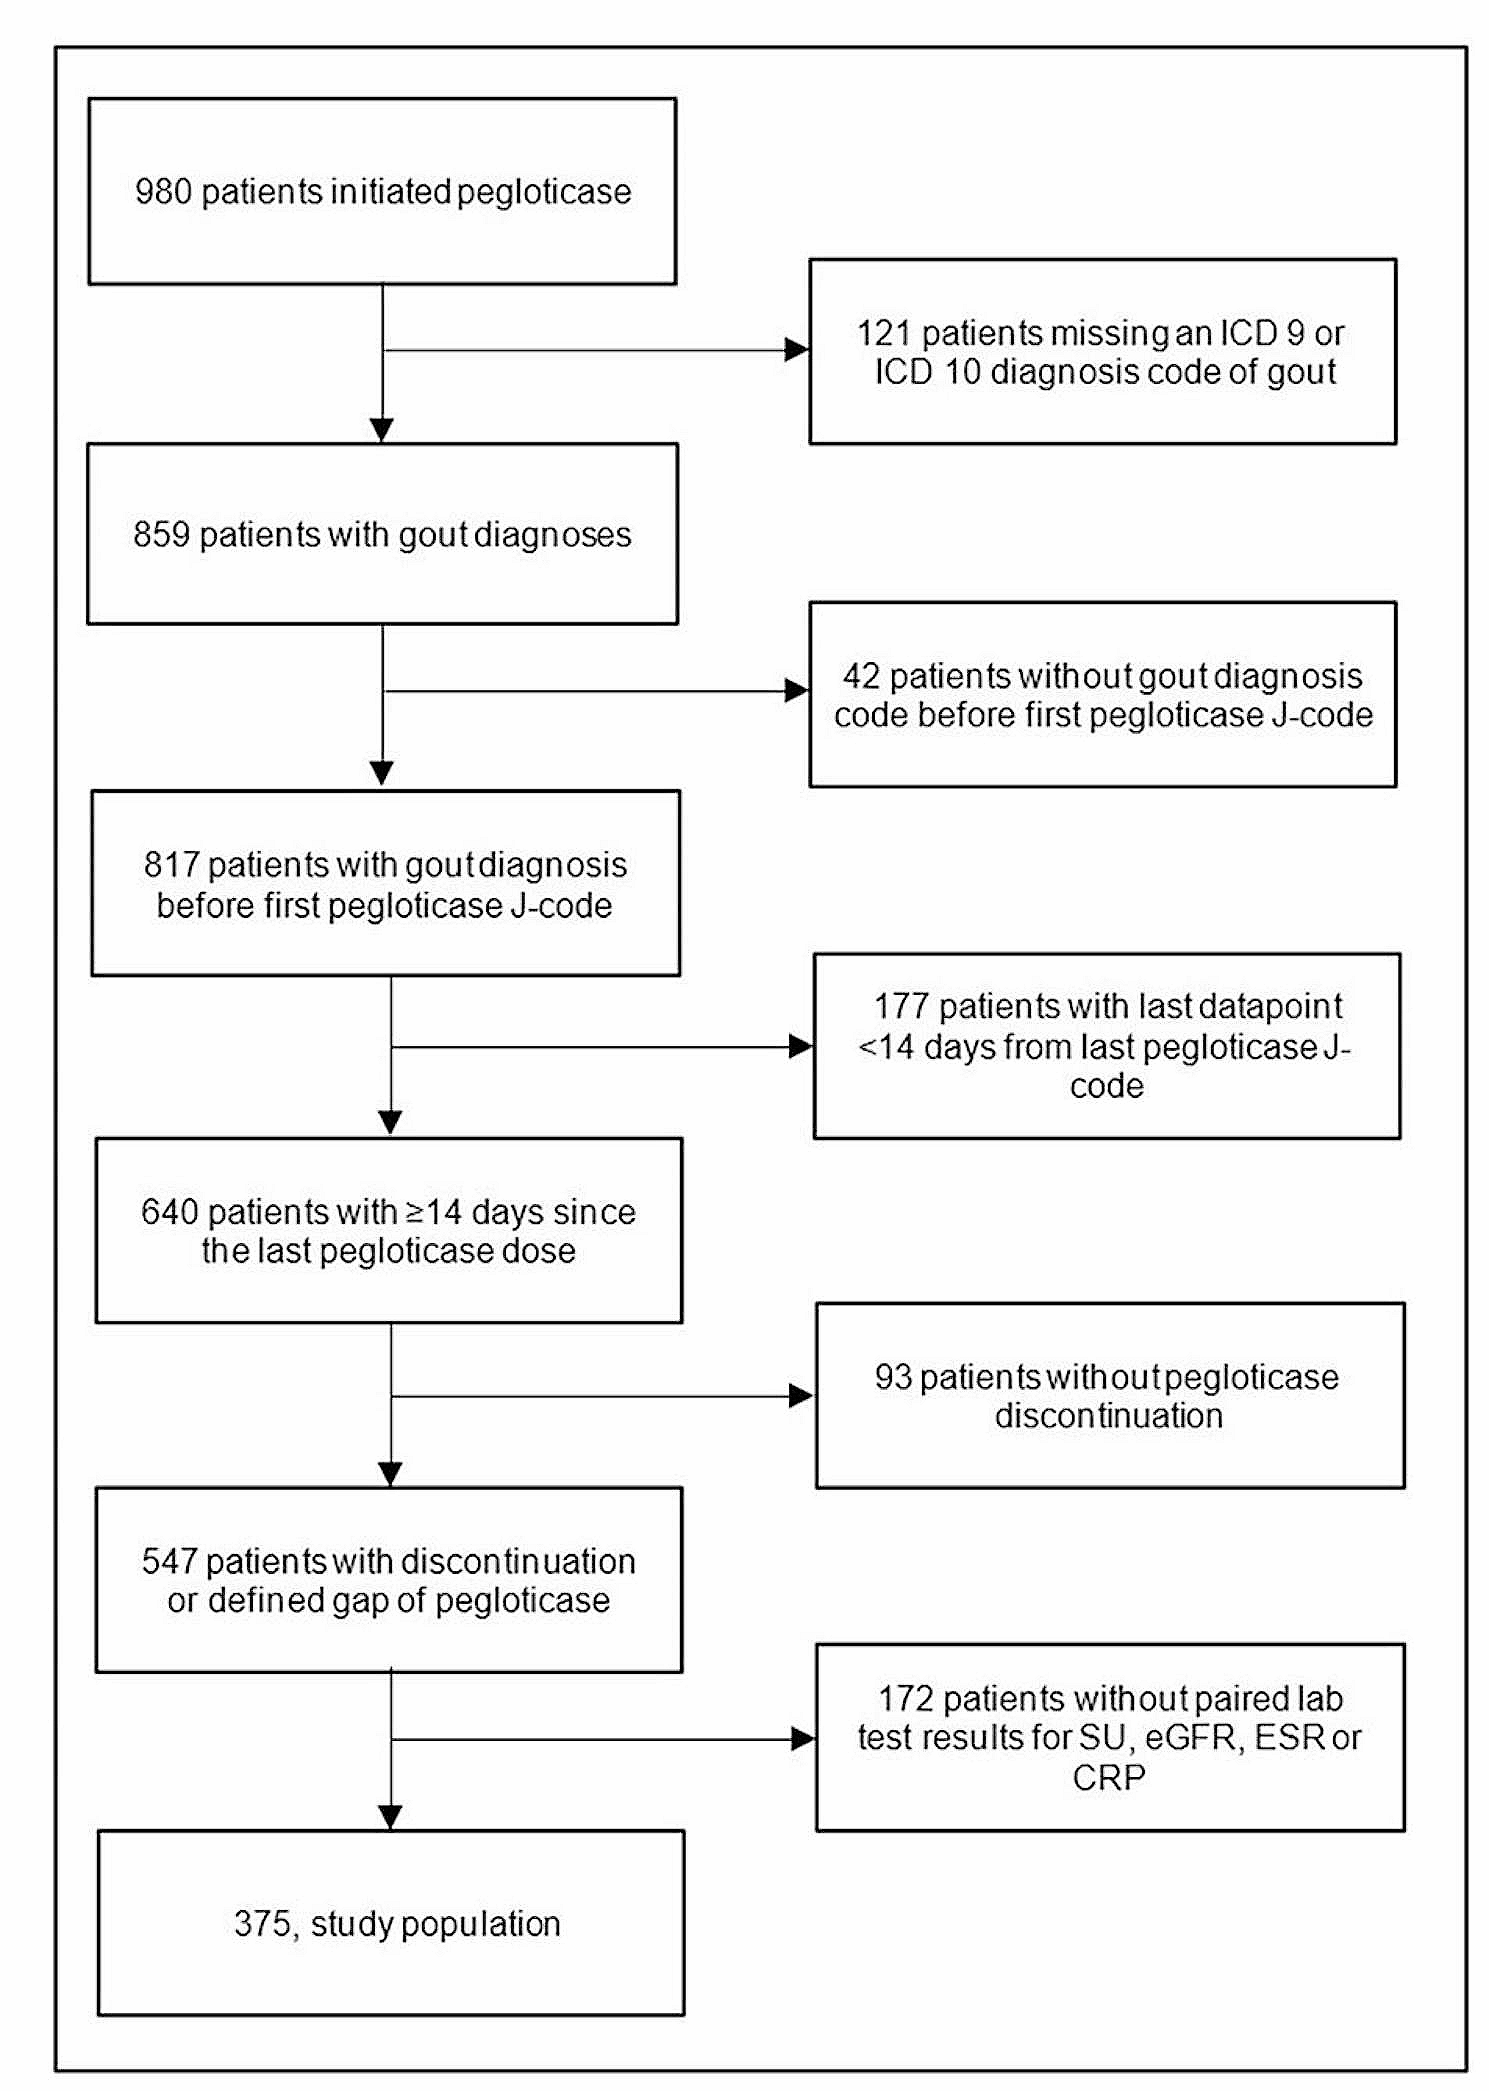 Urate-lowering therapy, serum urate, inflammatory biomarkers, and renal function in patients with gout following pegloticase discontinuation